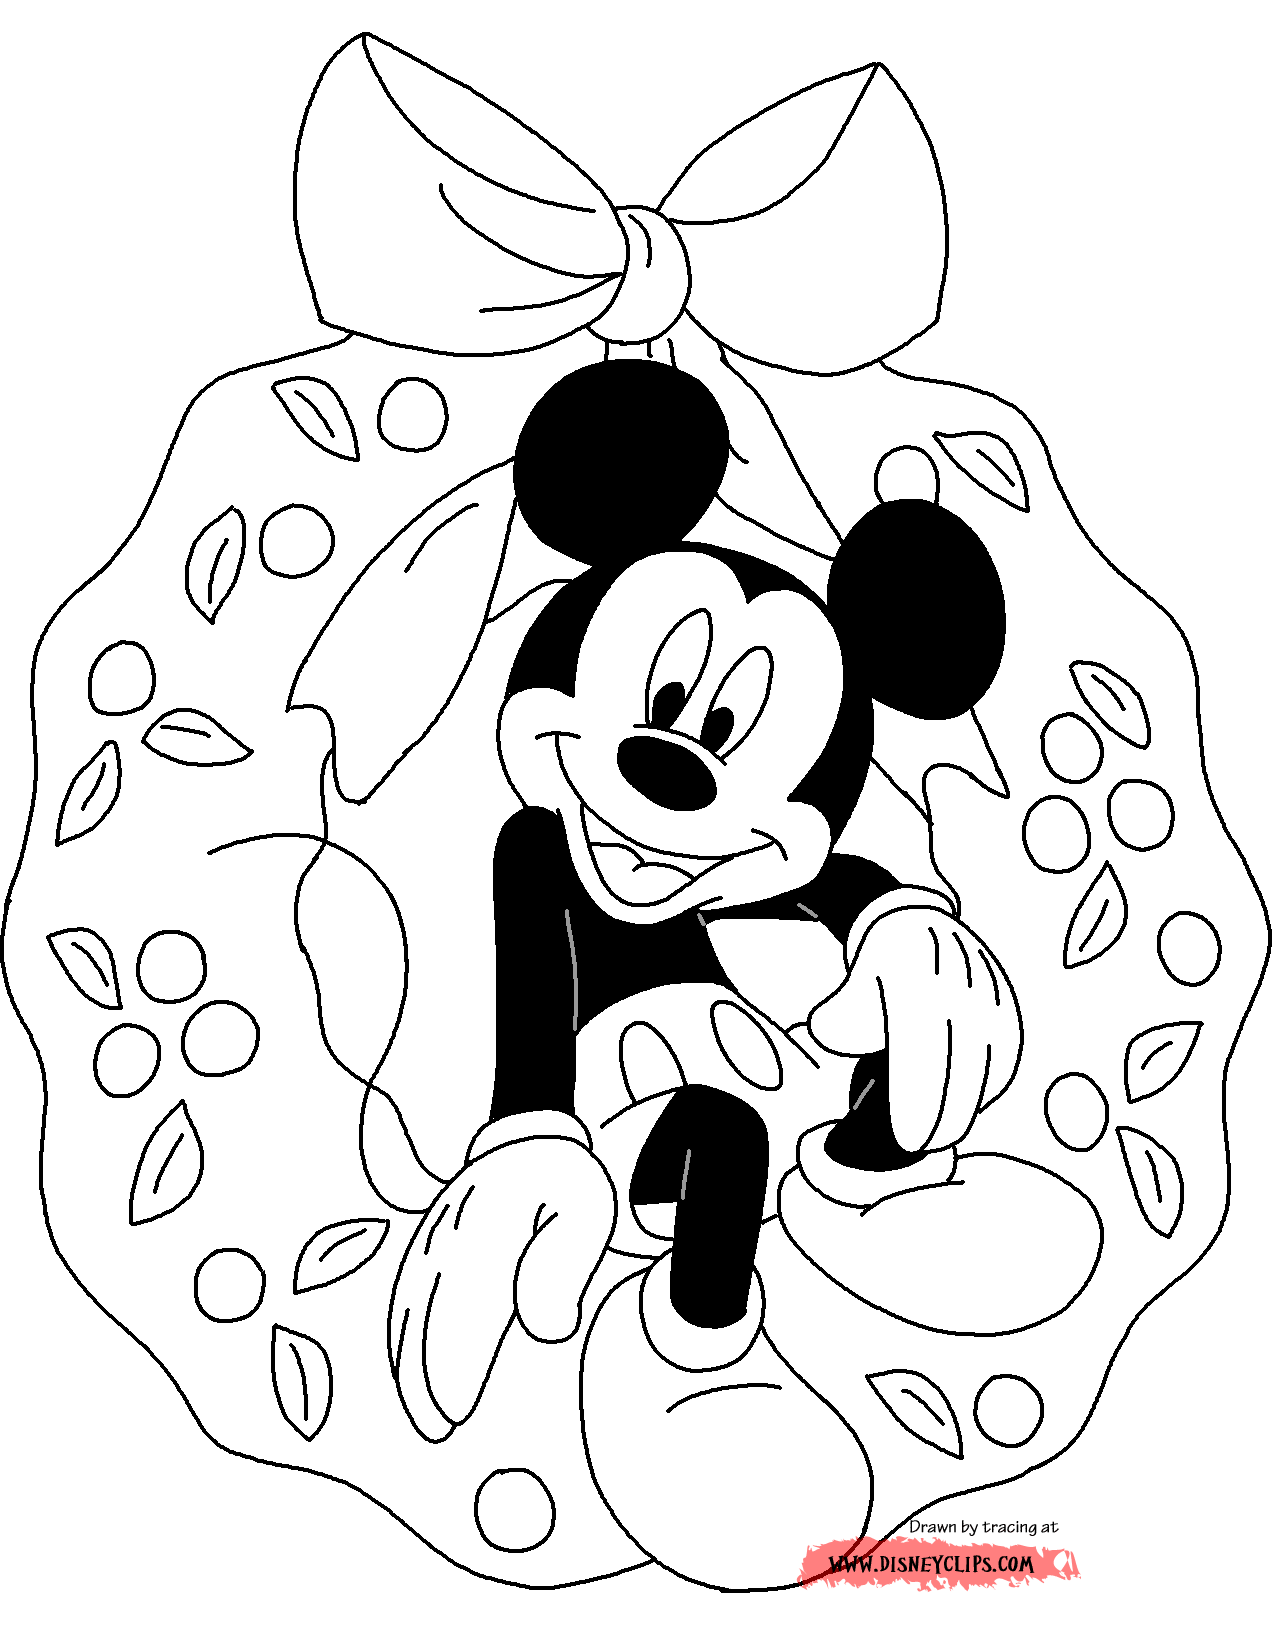 disney-christmas-coloring-pages-2-disneyclips